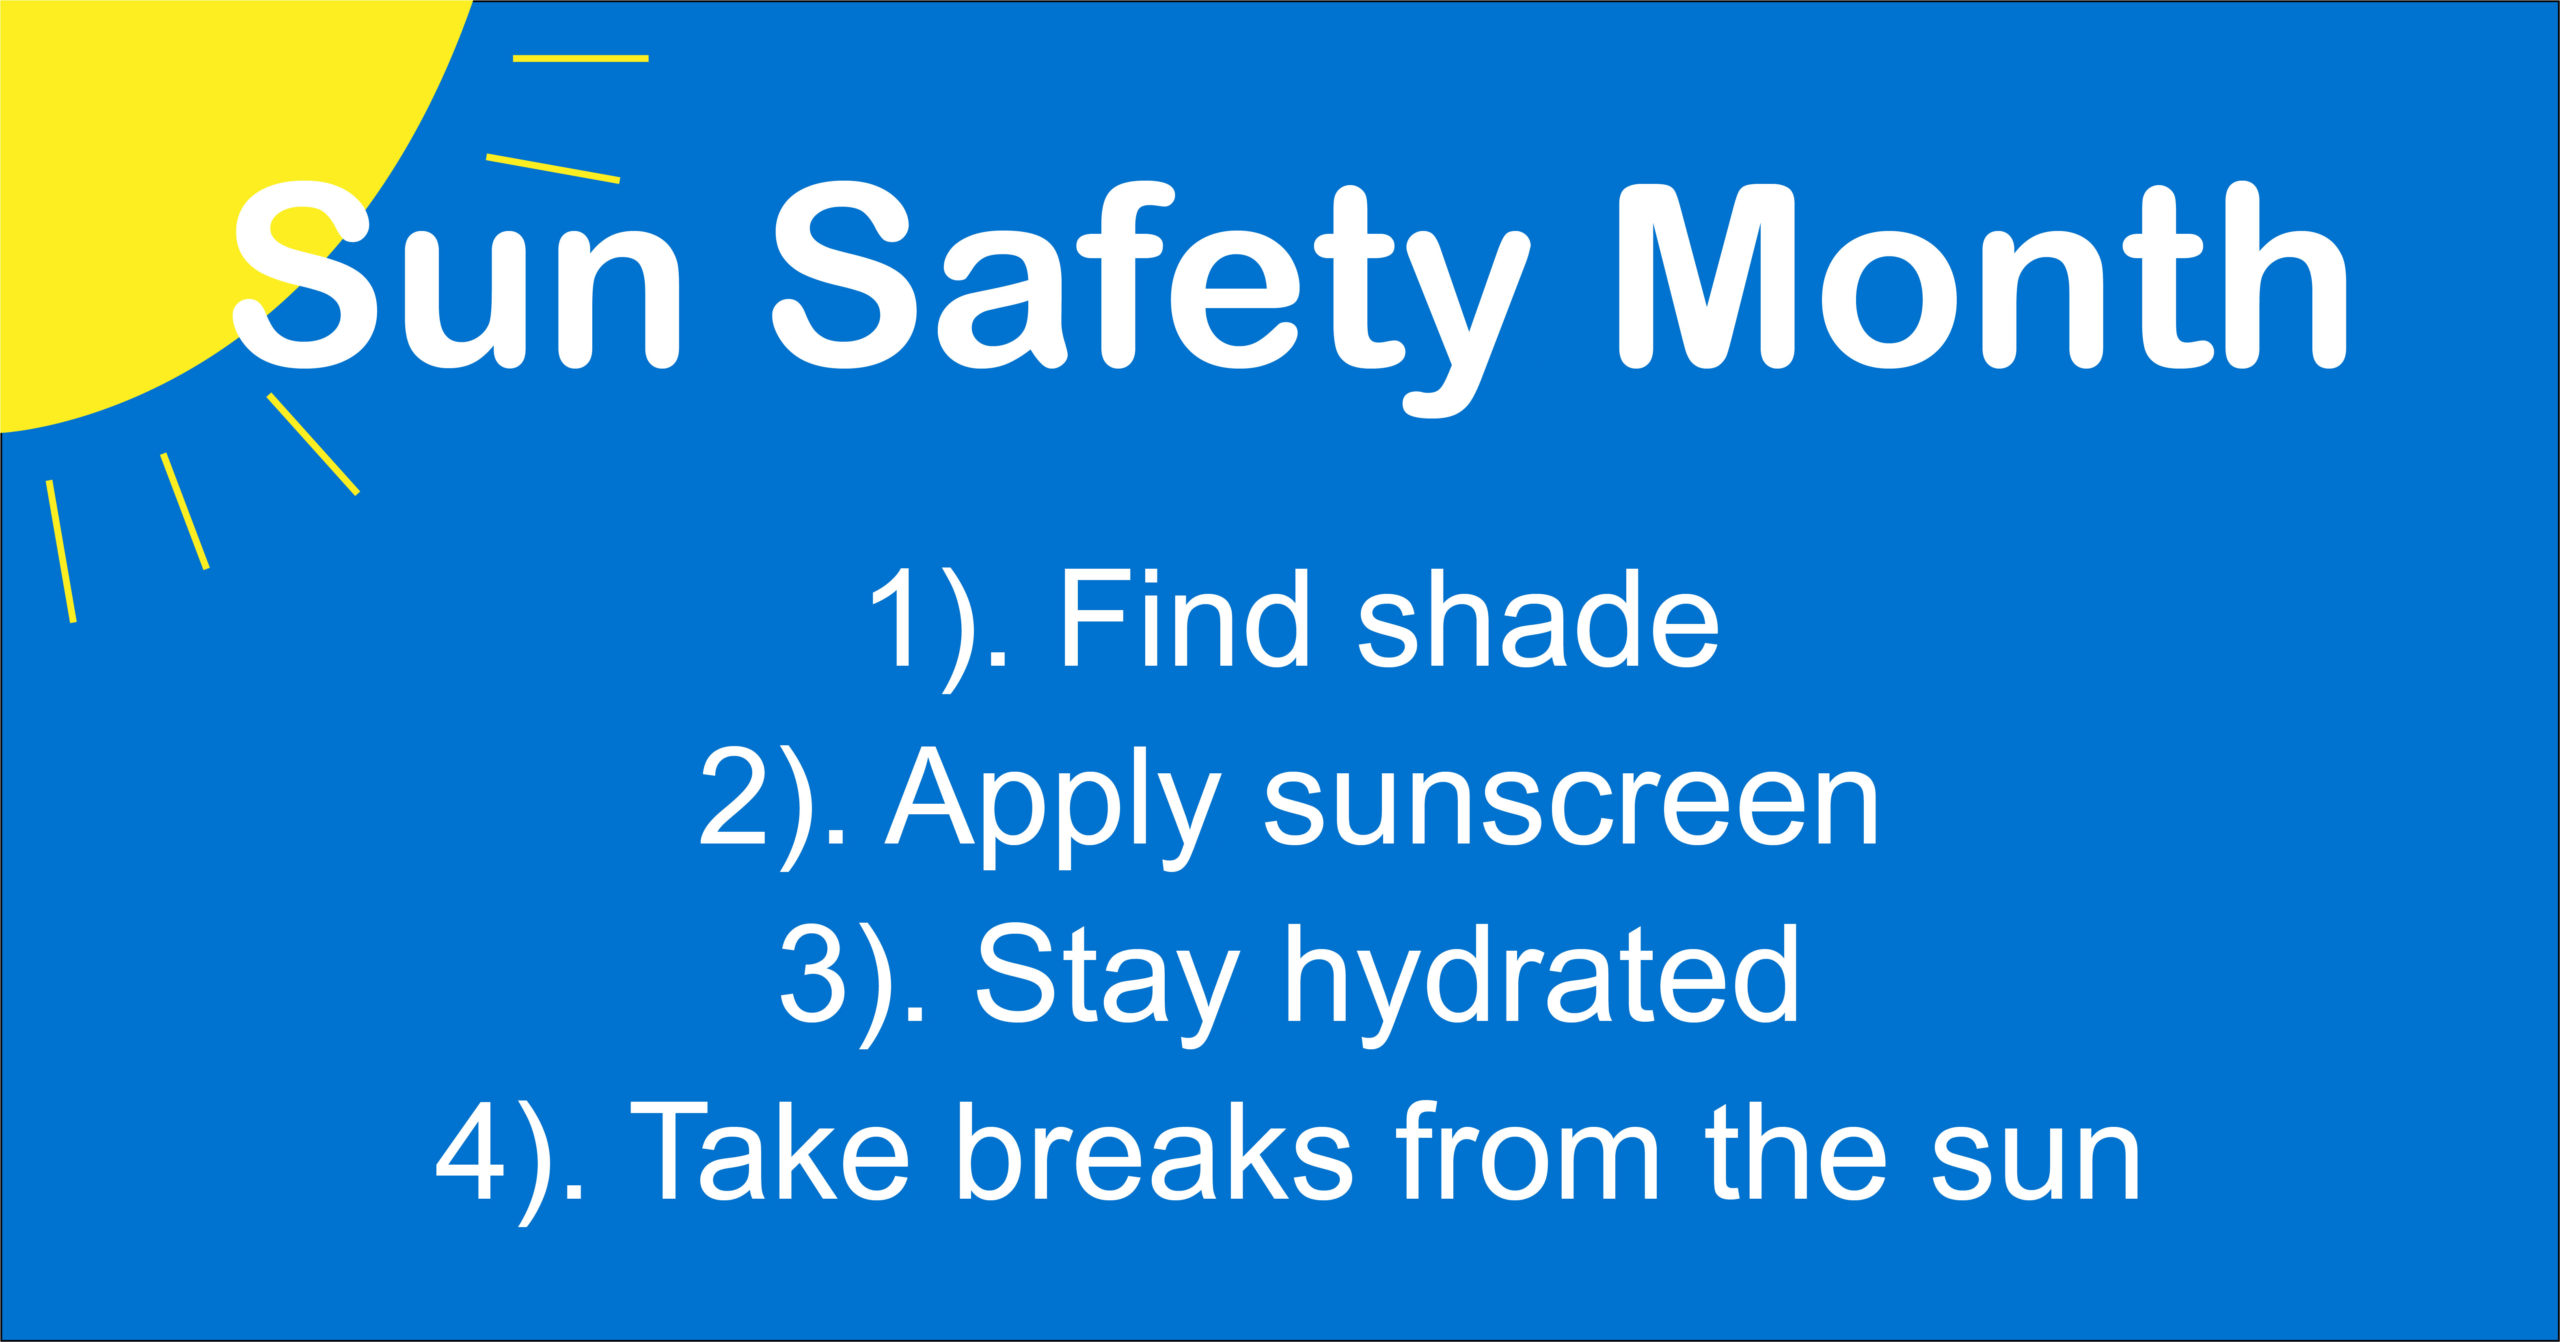 A graphic about sun safety tips during August, National Sun Safety Month.